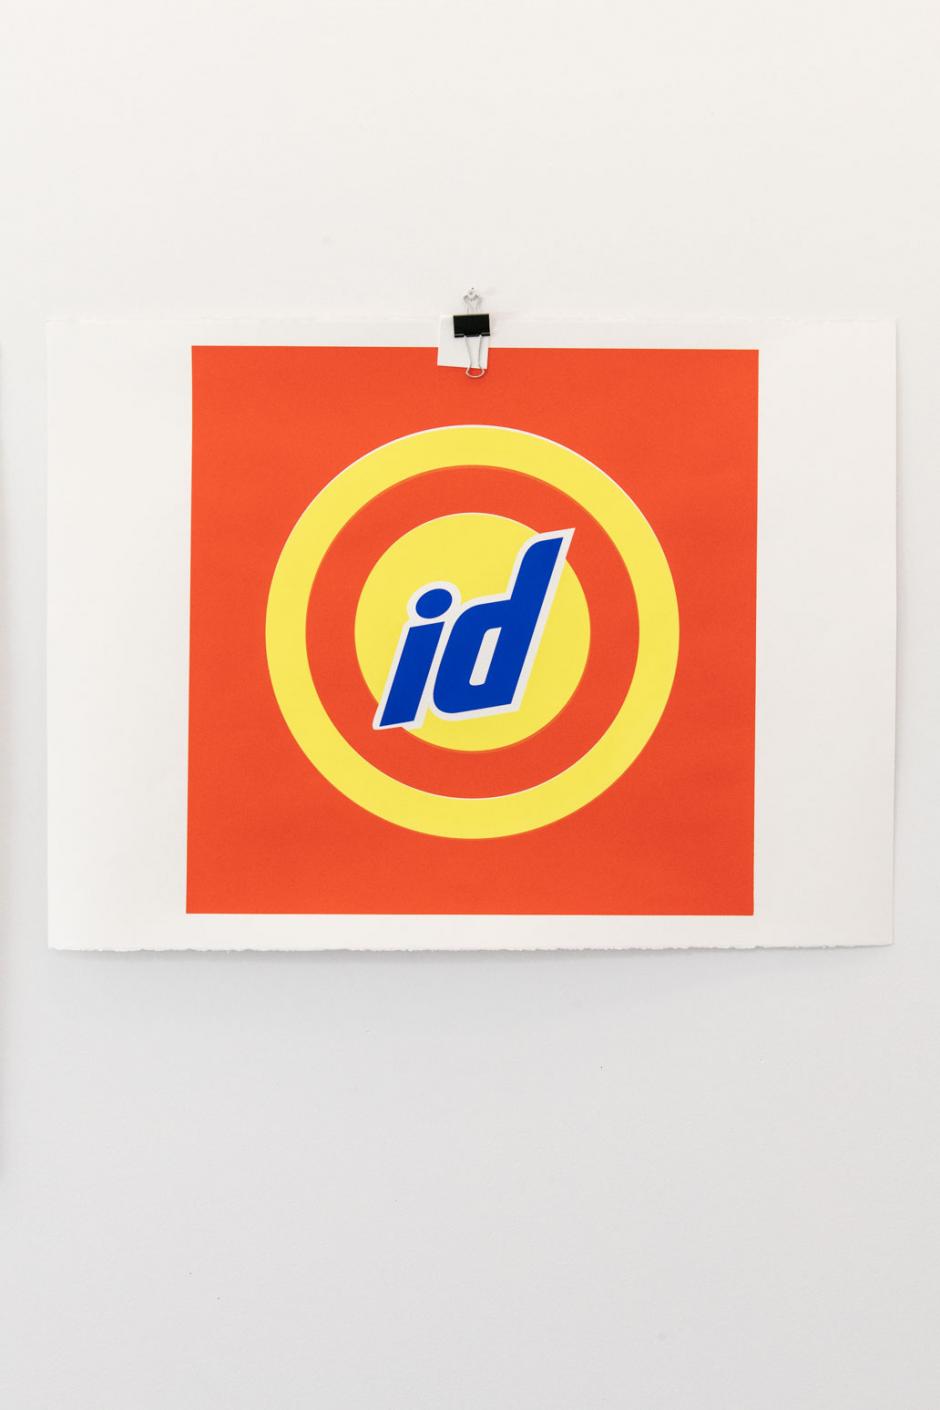 Single artwork featuring the letters 'id' overtop yellow circles on a orange background hanging on the wall of Dana's studio at Banff Centre.